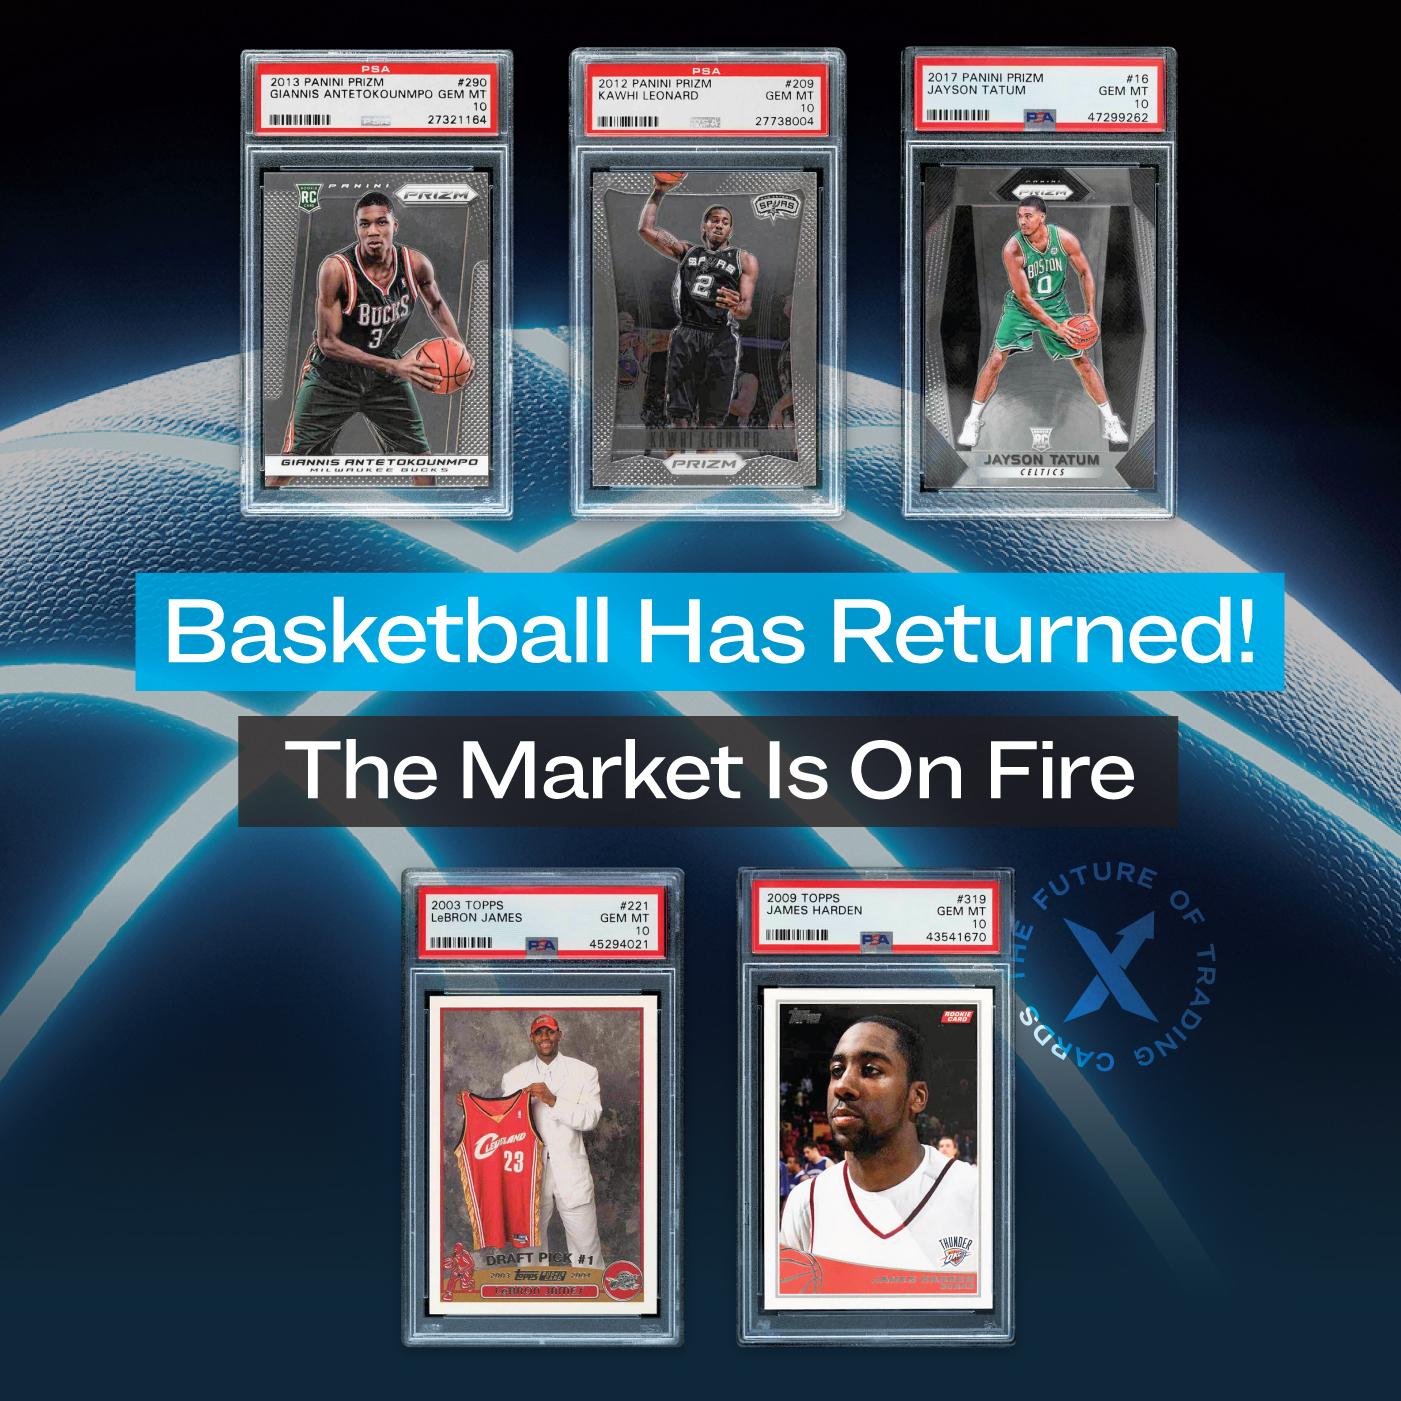 Basketball Has Returned! The Market Is On Fire